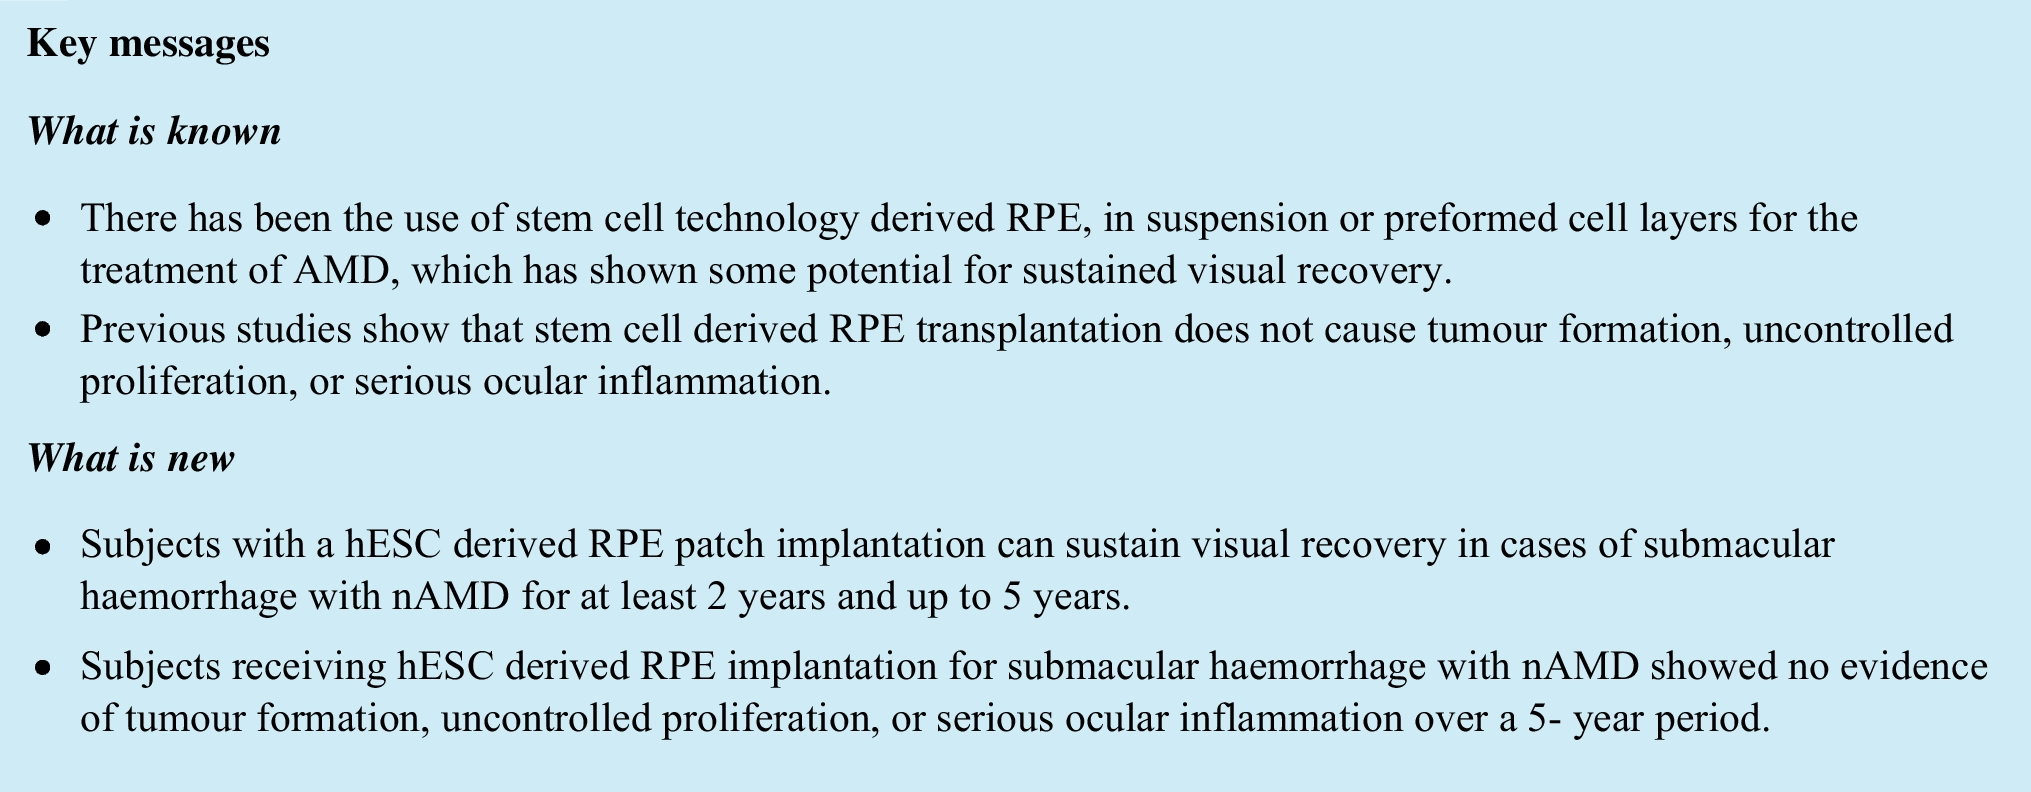 Safety, structure and function five years after hESC-RPE patch transplantation in acute neovascular AMD with submacular haemorrhage